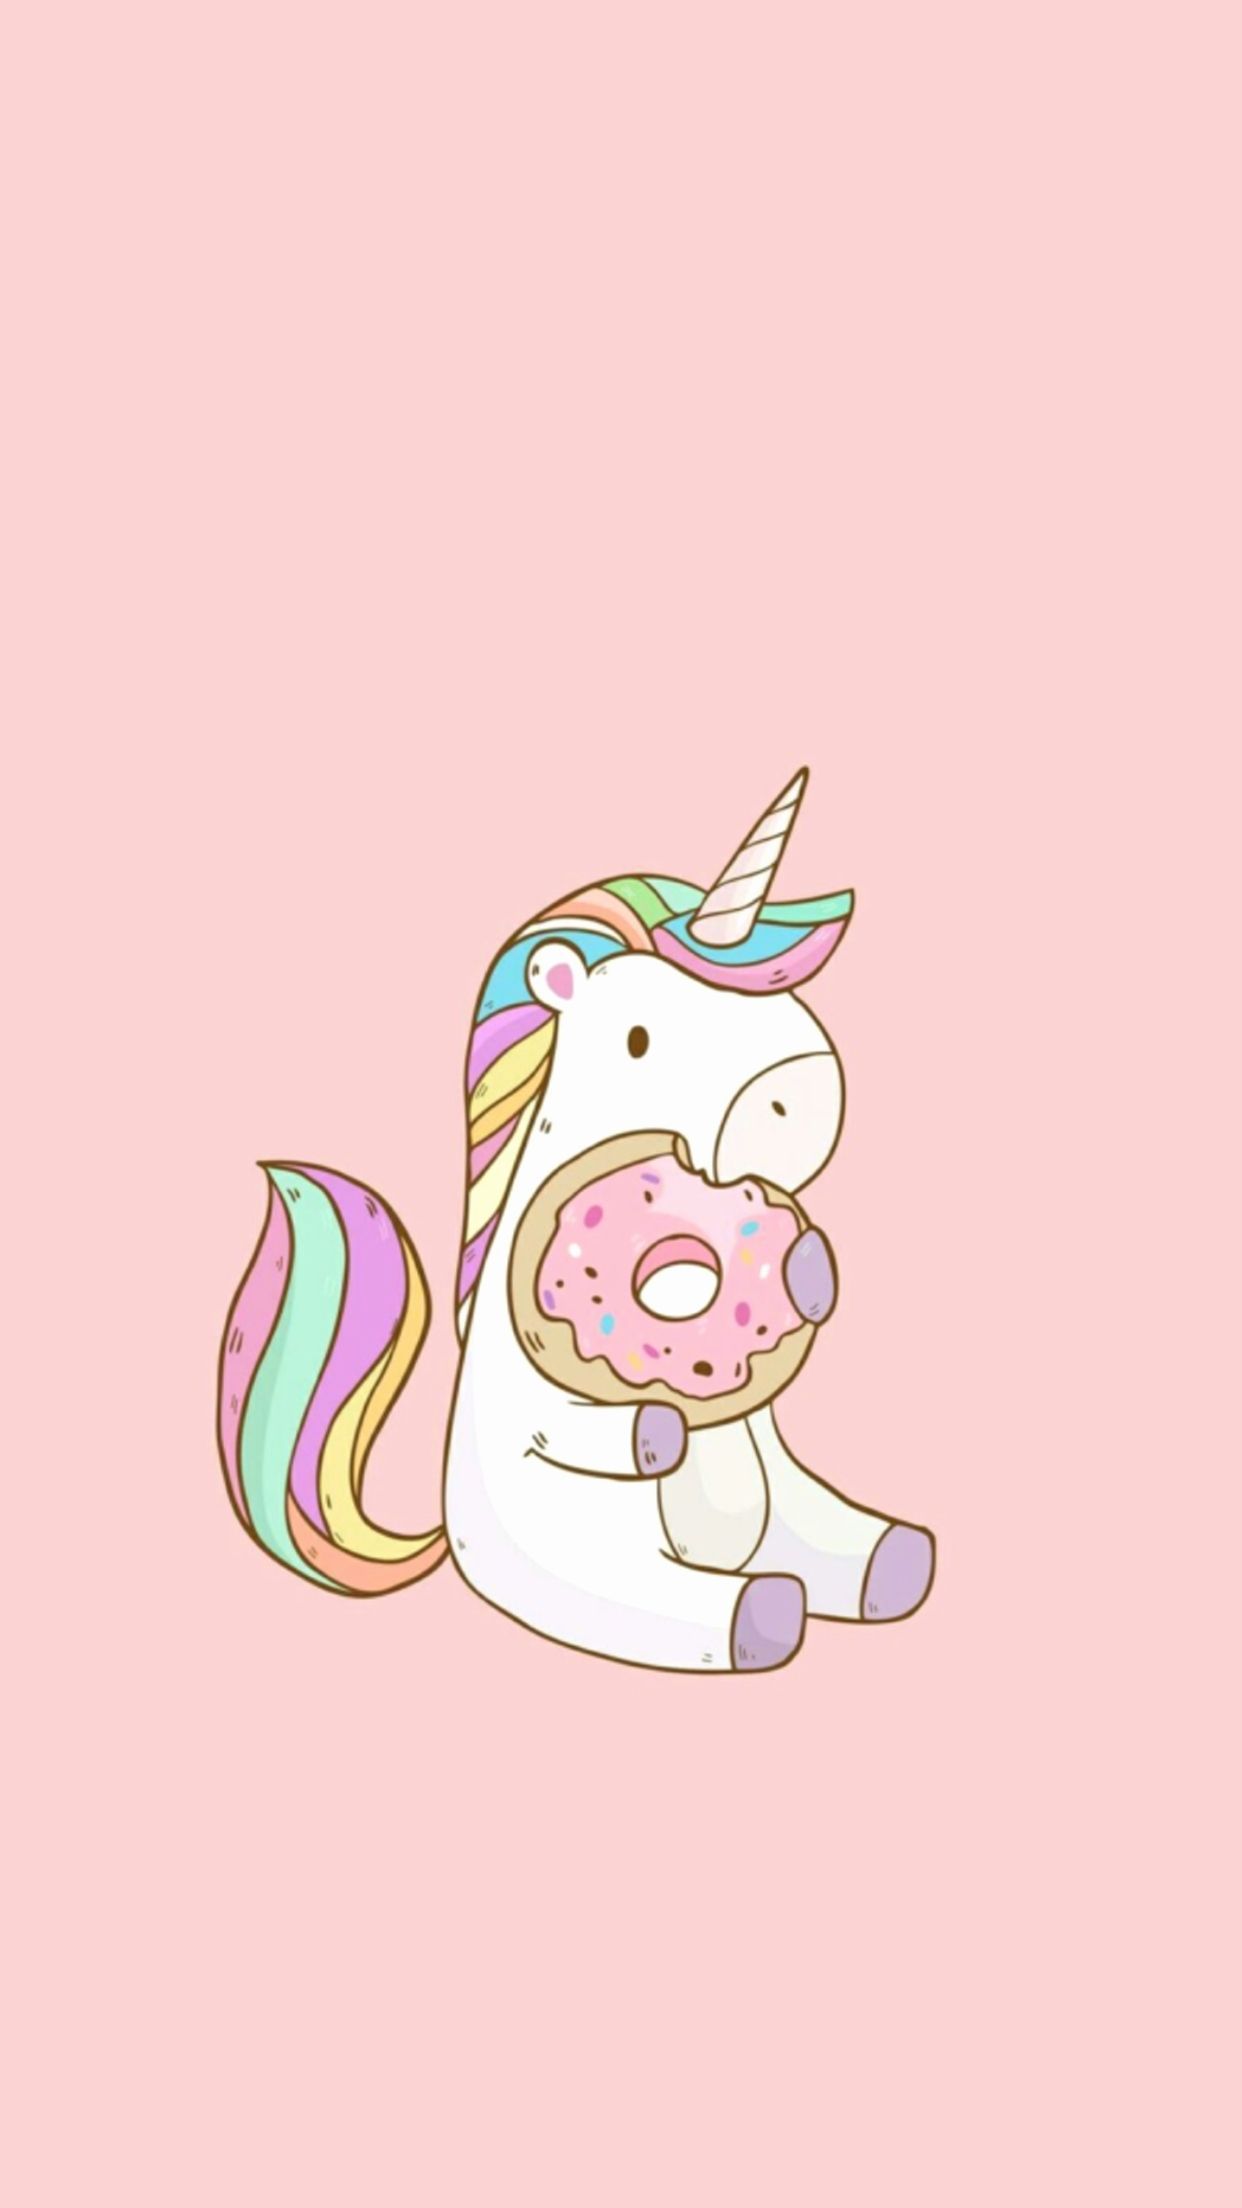 Cute unicorn eating a donut wallpaper for iPhone, Android, Desktop and Laptop. - Unicorn